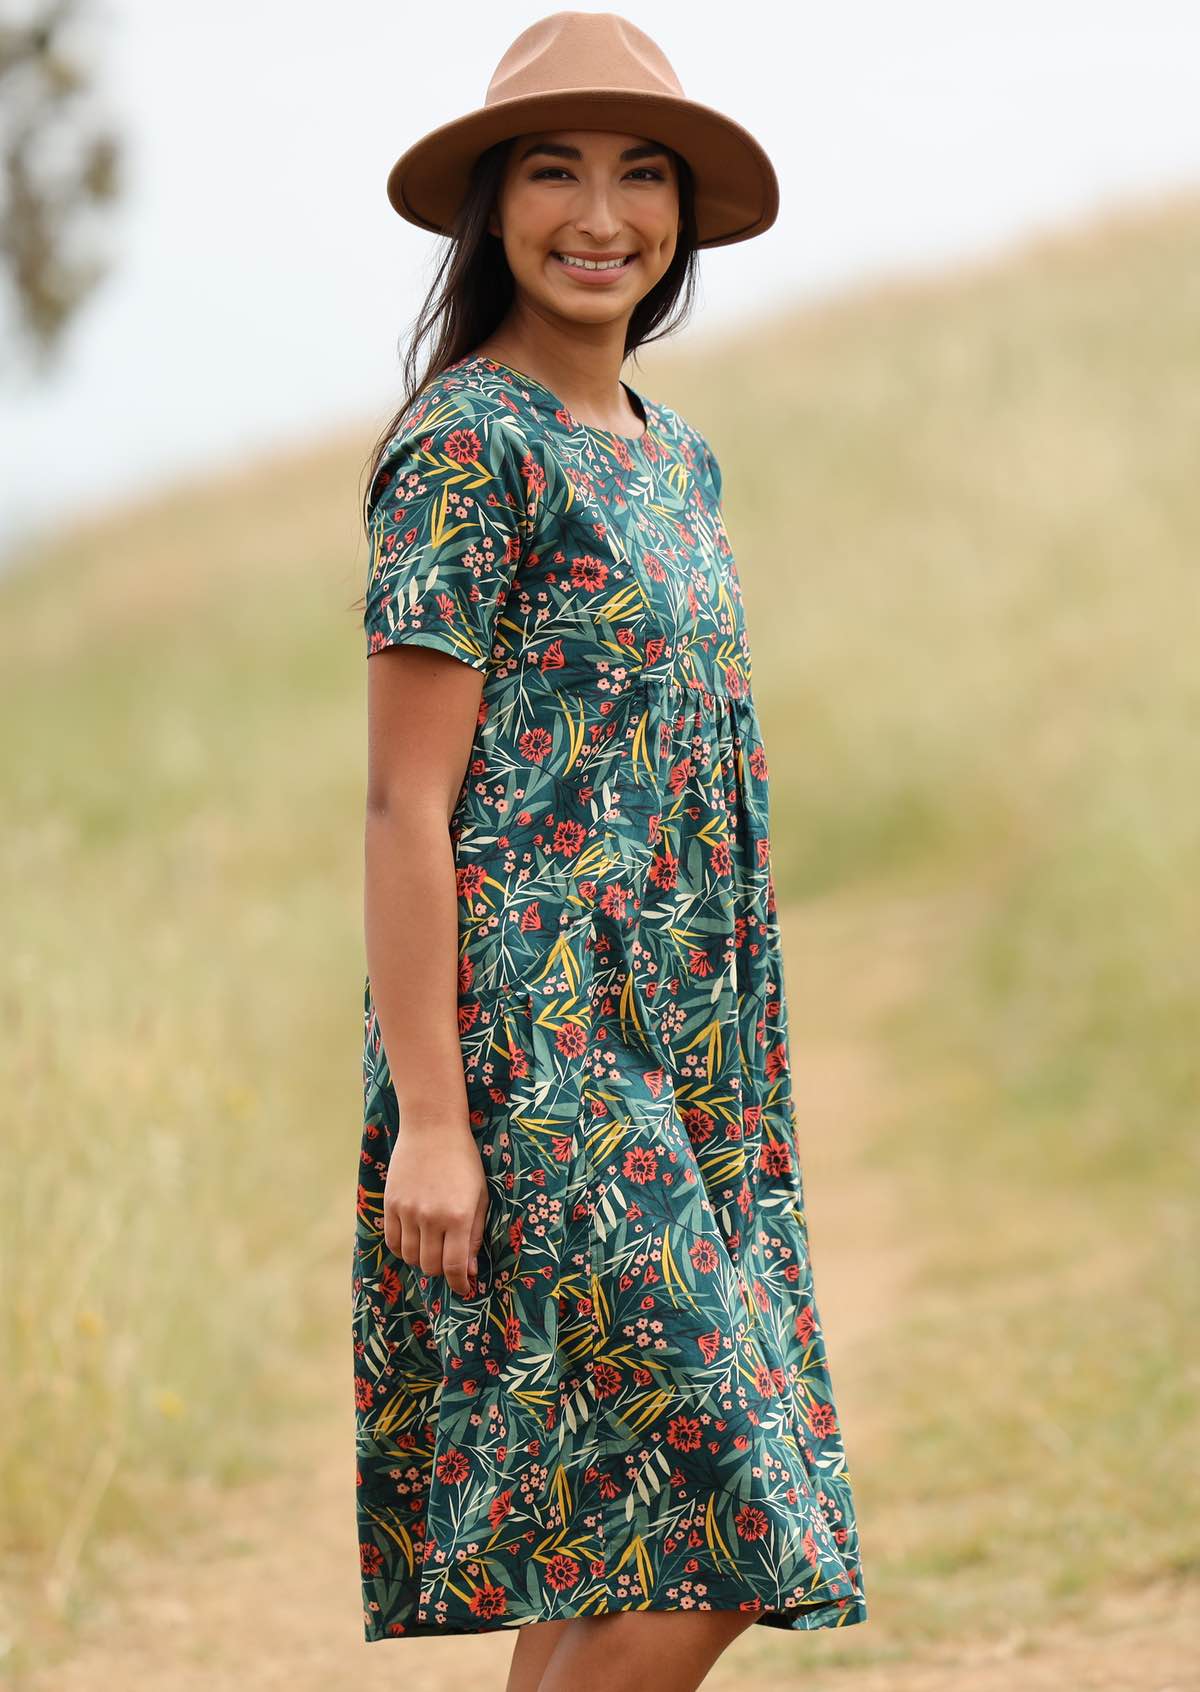 Smiling model pairs her floral dress with a hat for sun protection. 